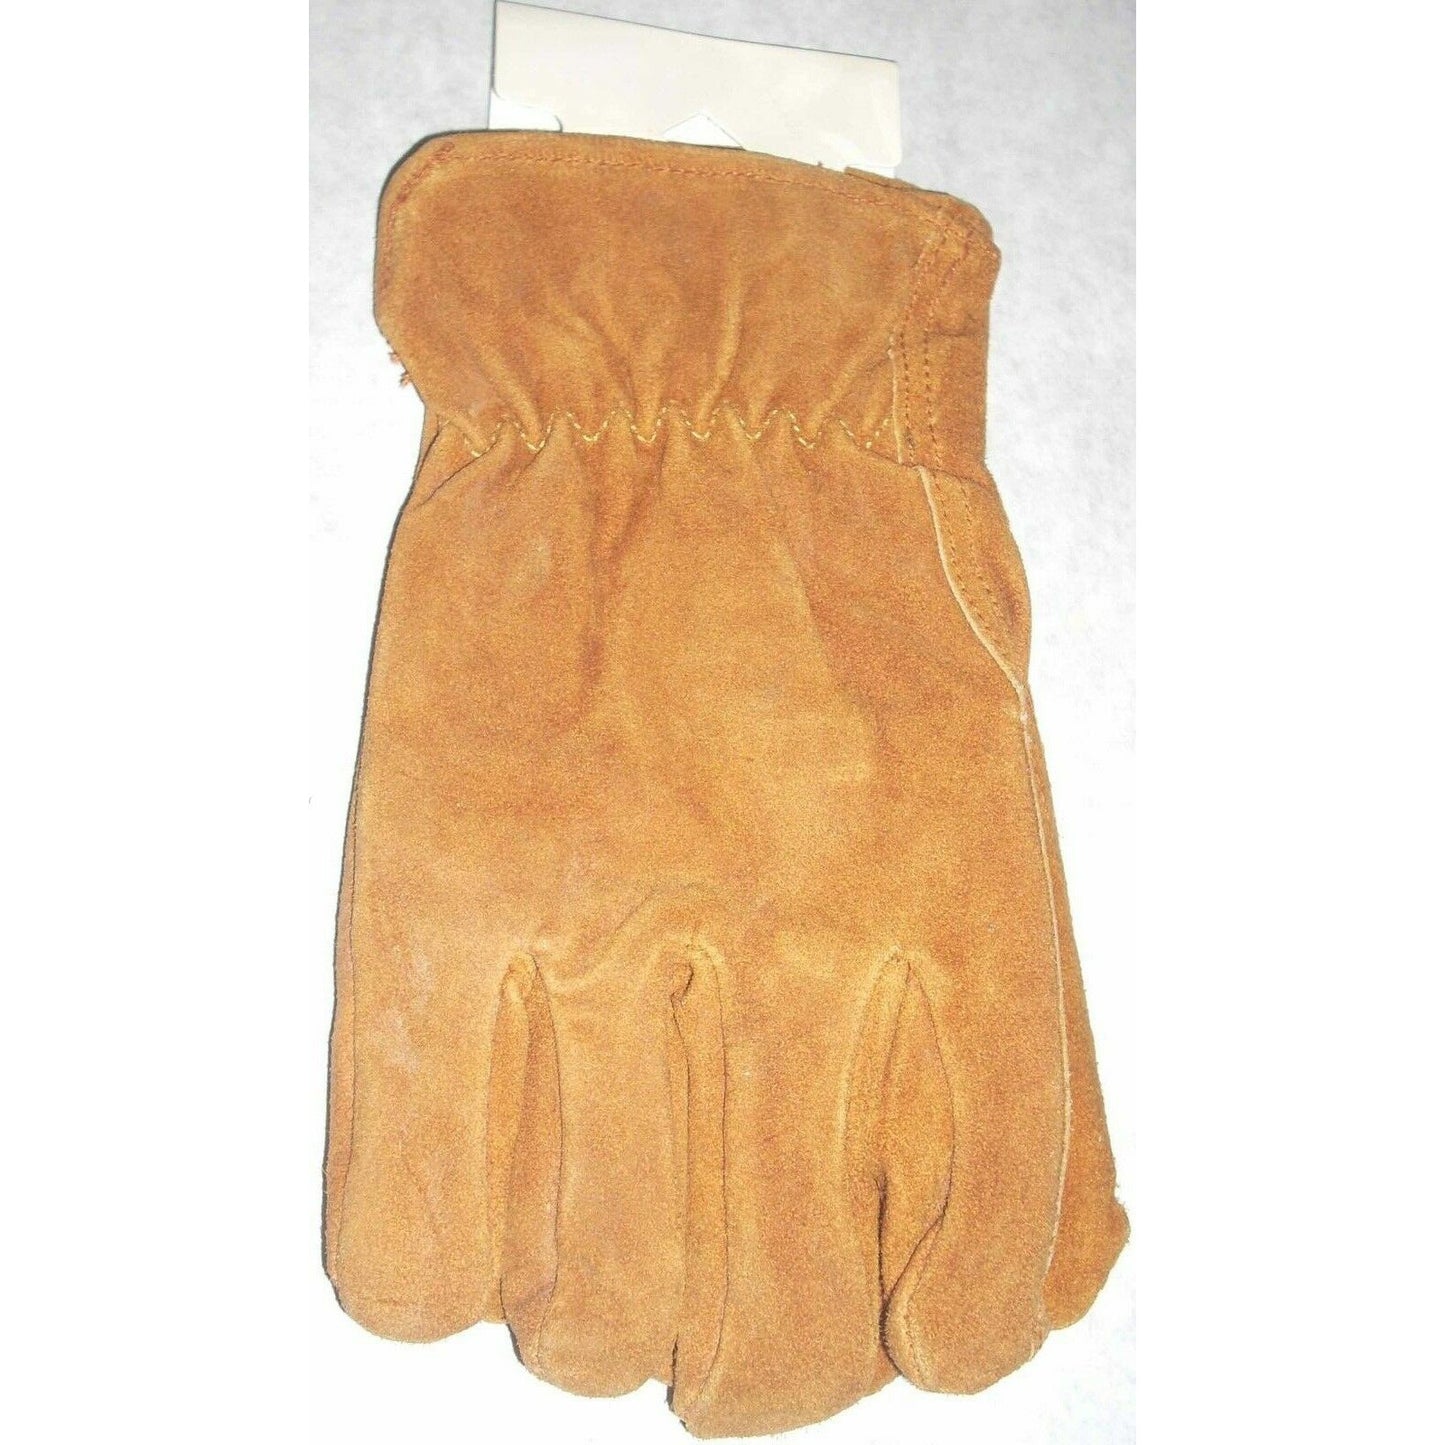 Liberty 8444M Cowhide Leather Gloves w Red Fleece Lining Size Medium